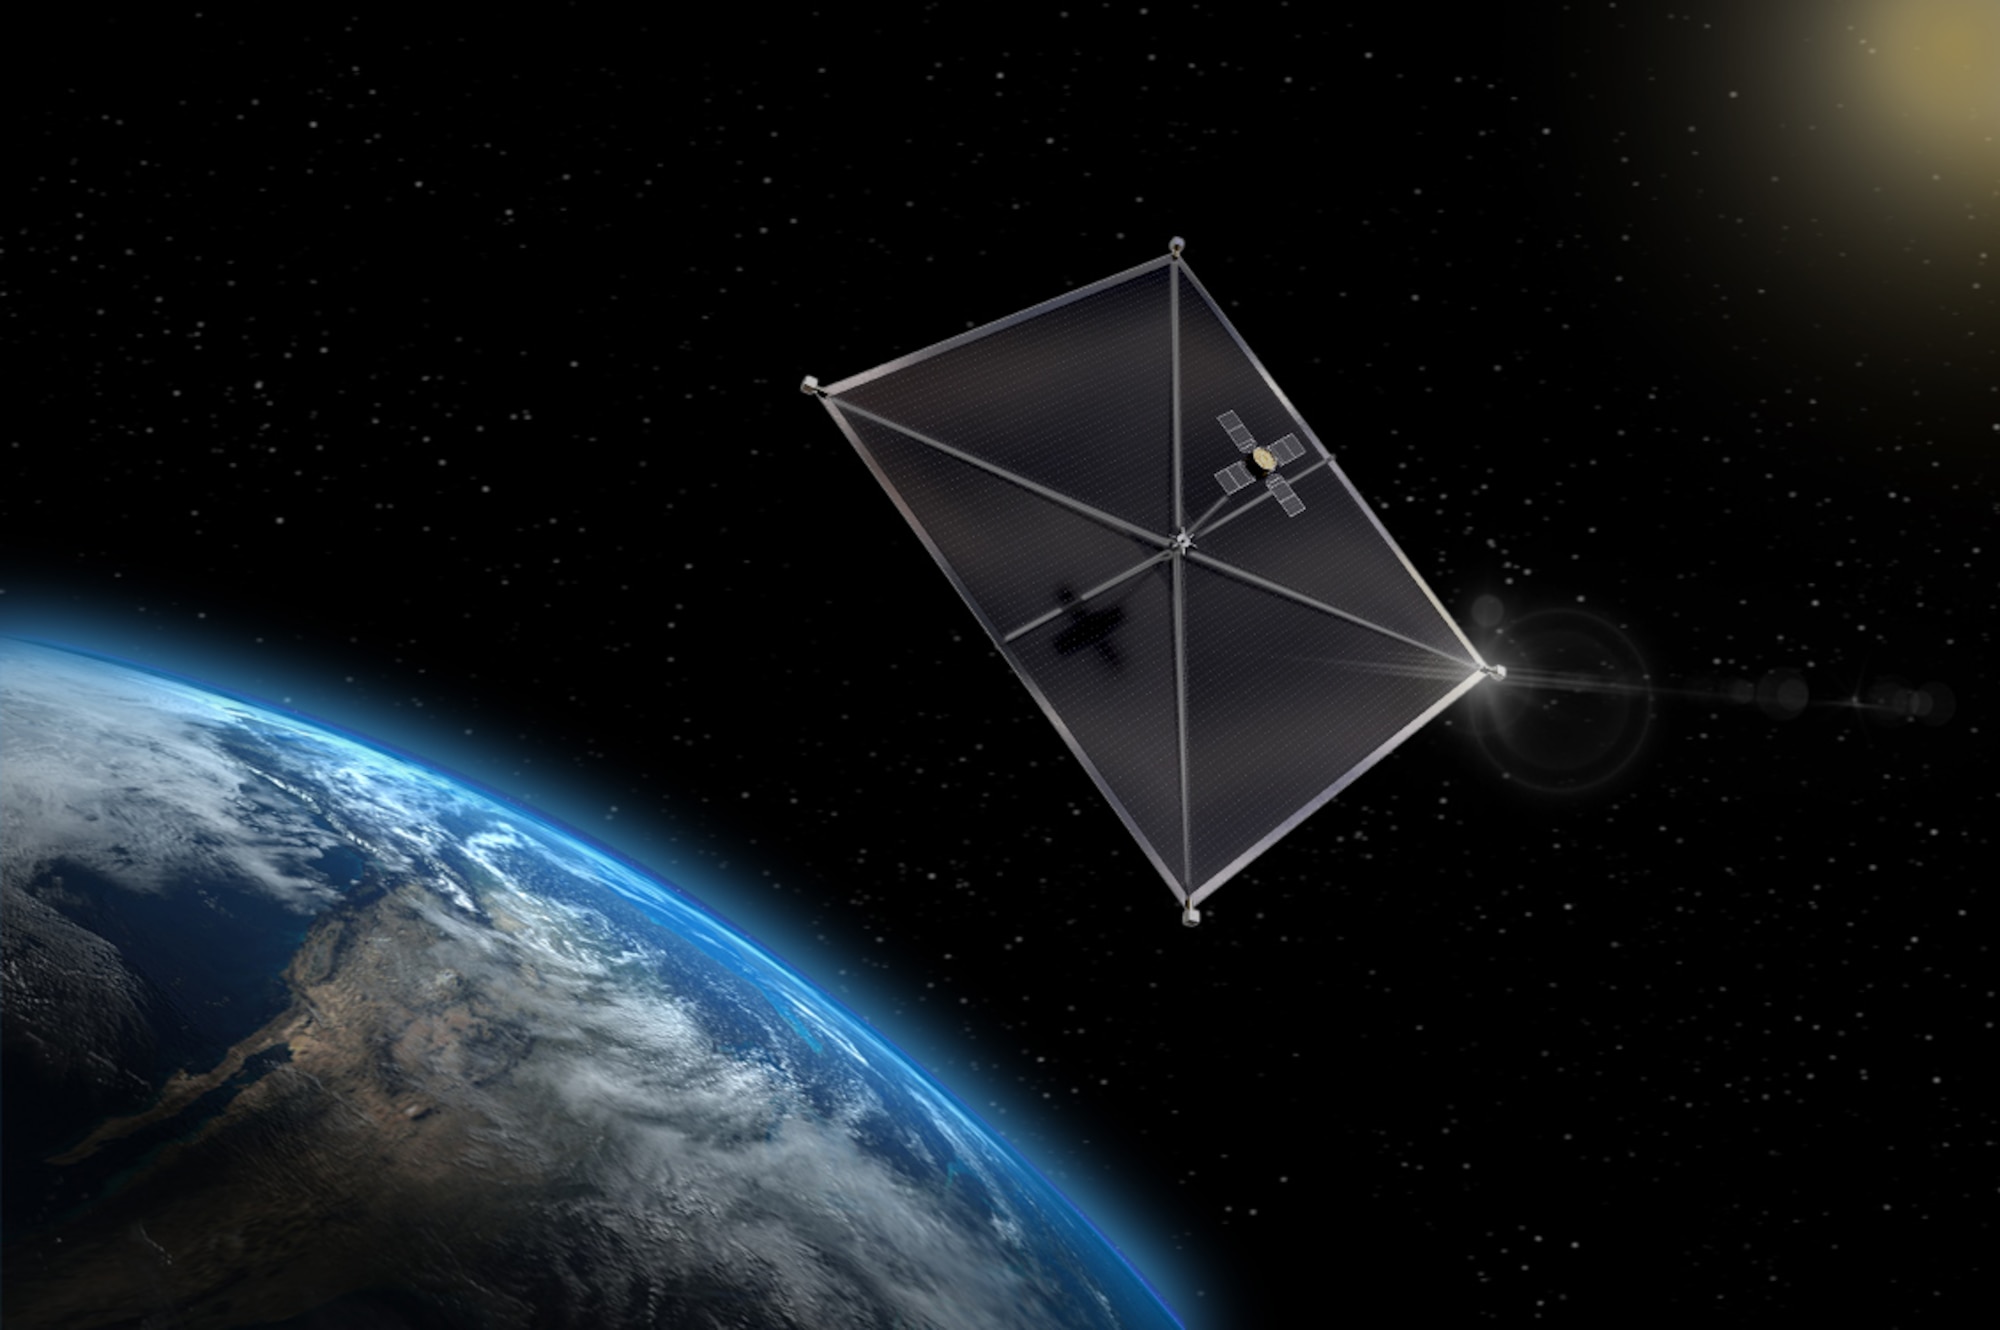 The image depicts a space based solar power beaming system, the end-goal for the Space Solar Power Incremental Demonstrations and Research, or SSPIDR, project. SSPIDR consists of several small-scale flight experiments that will mature technologies needed to build a prototype solar power distribution system.